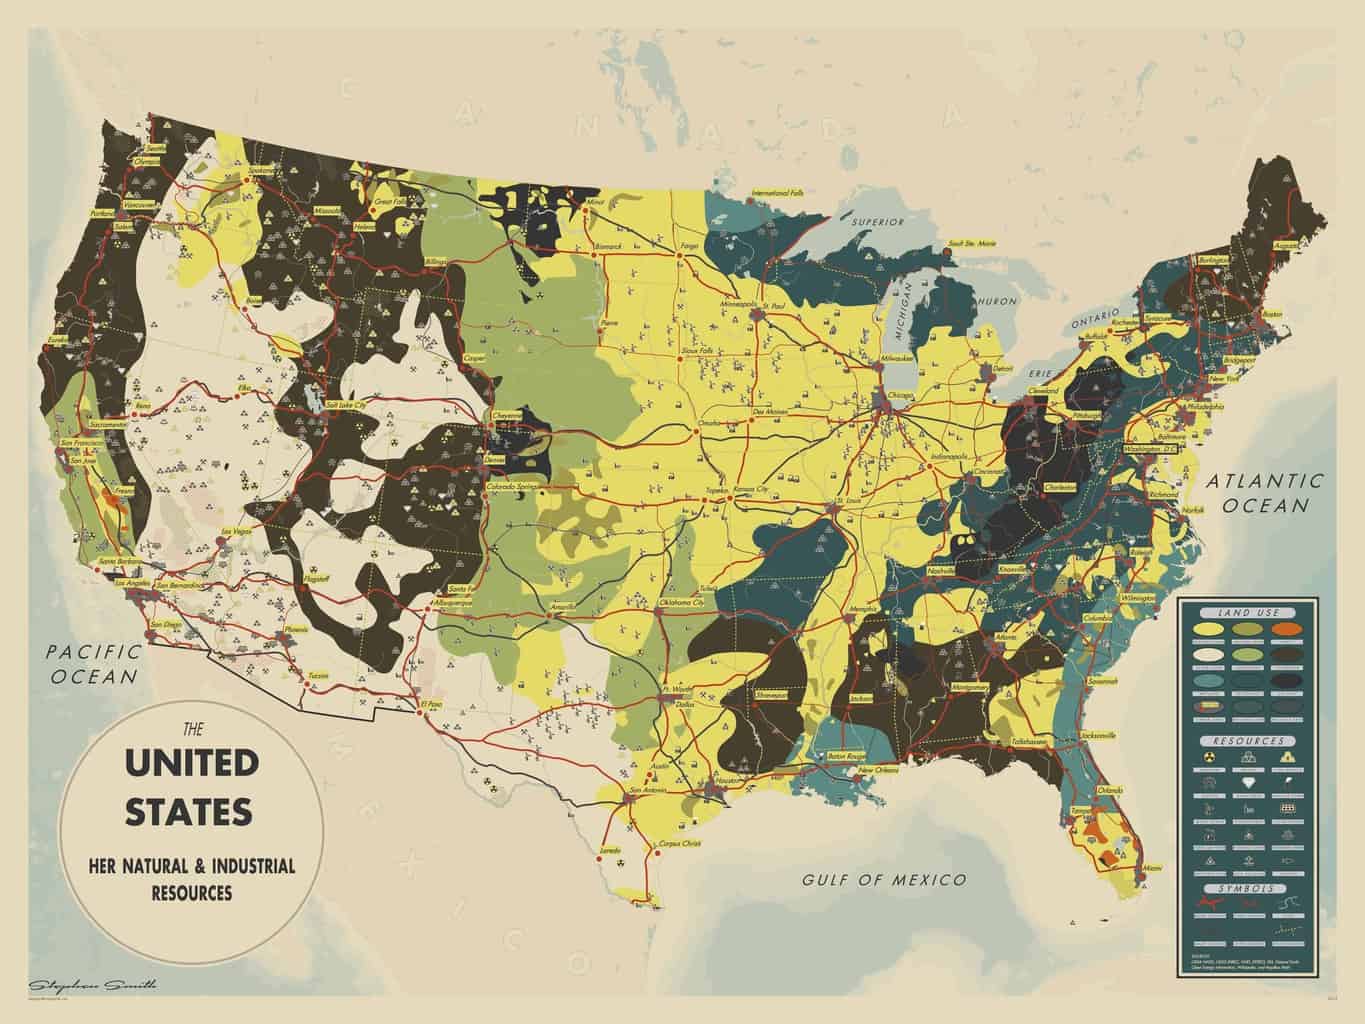 Resource Map Of The United States MapsmithThe United States: Her Natural and Industrial Resources 